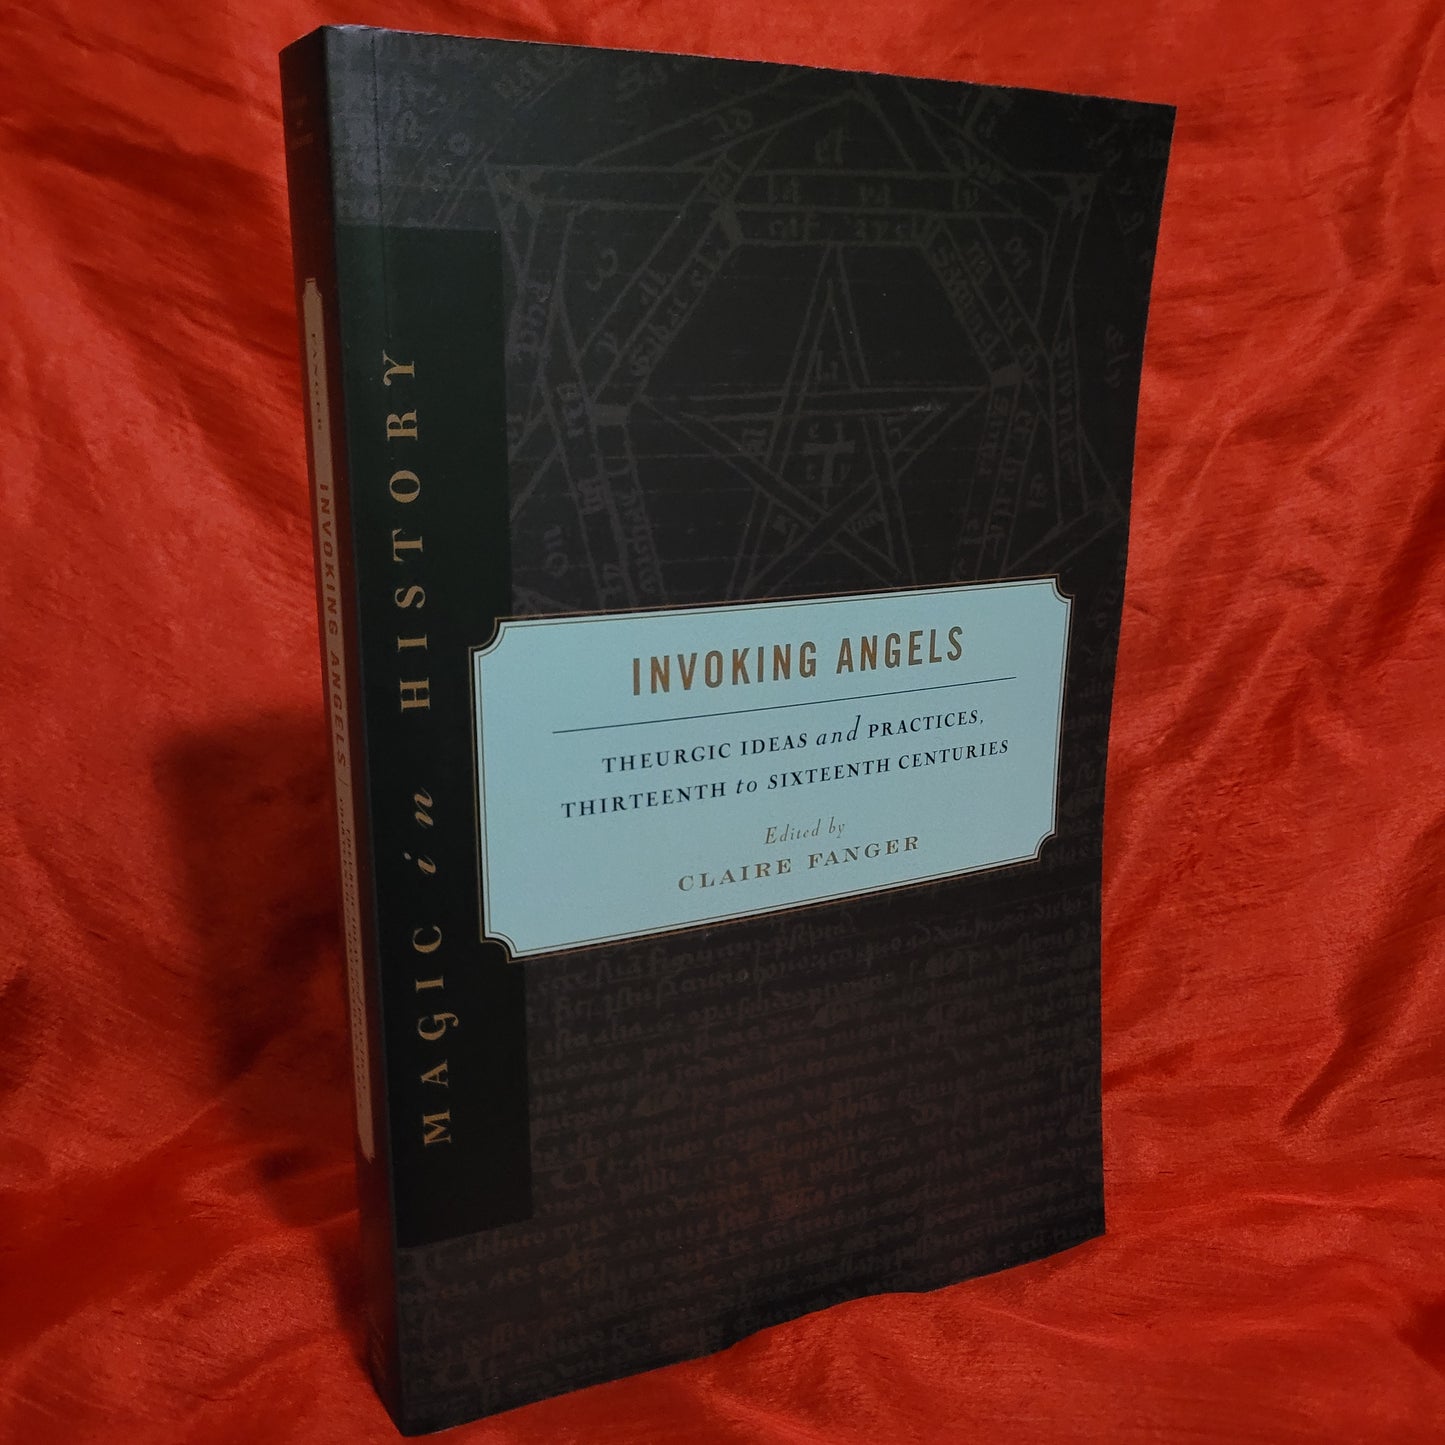 Invoking Angels: Theurgic Ideas and Practices, Thirteenth to Sixteenth Centuries edited by Clare Fanger (The Pennsylvania State University Press, 2012) Paperback